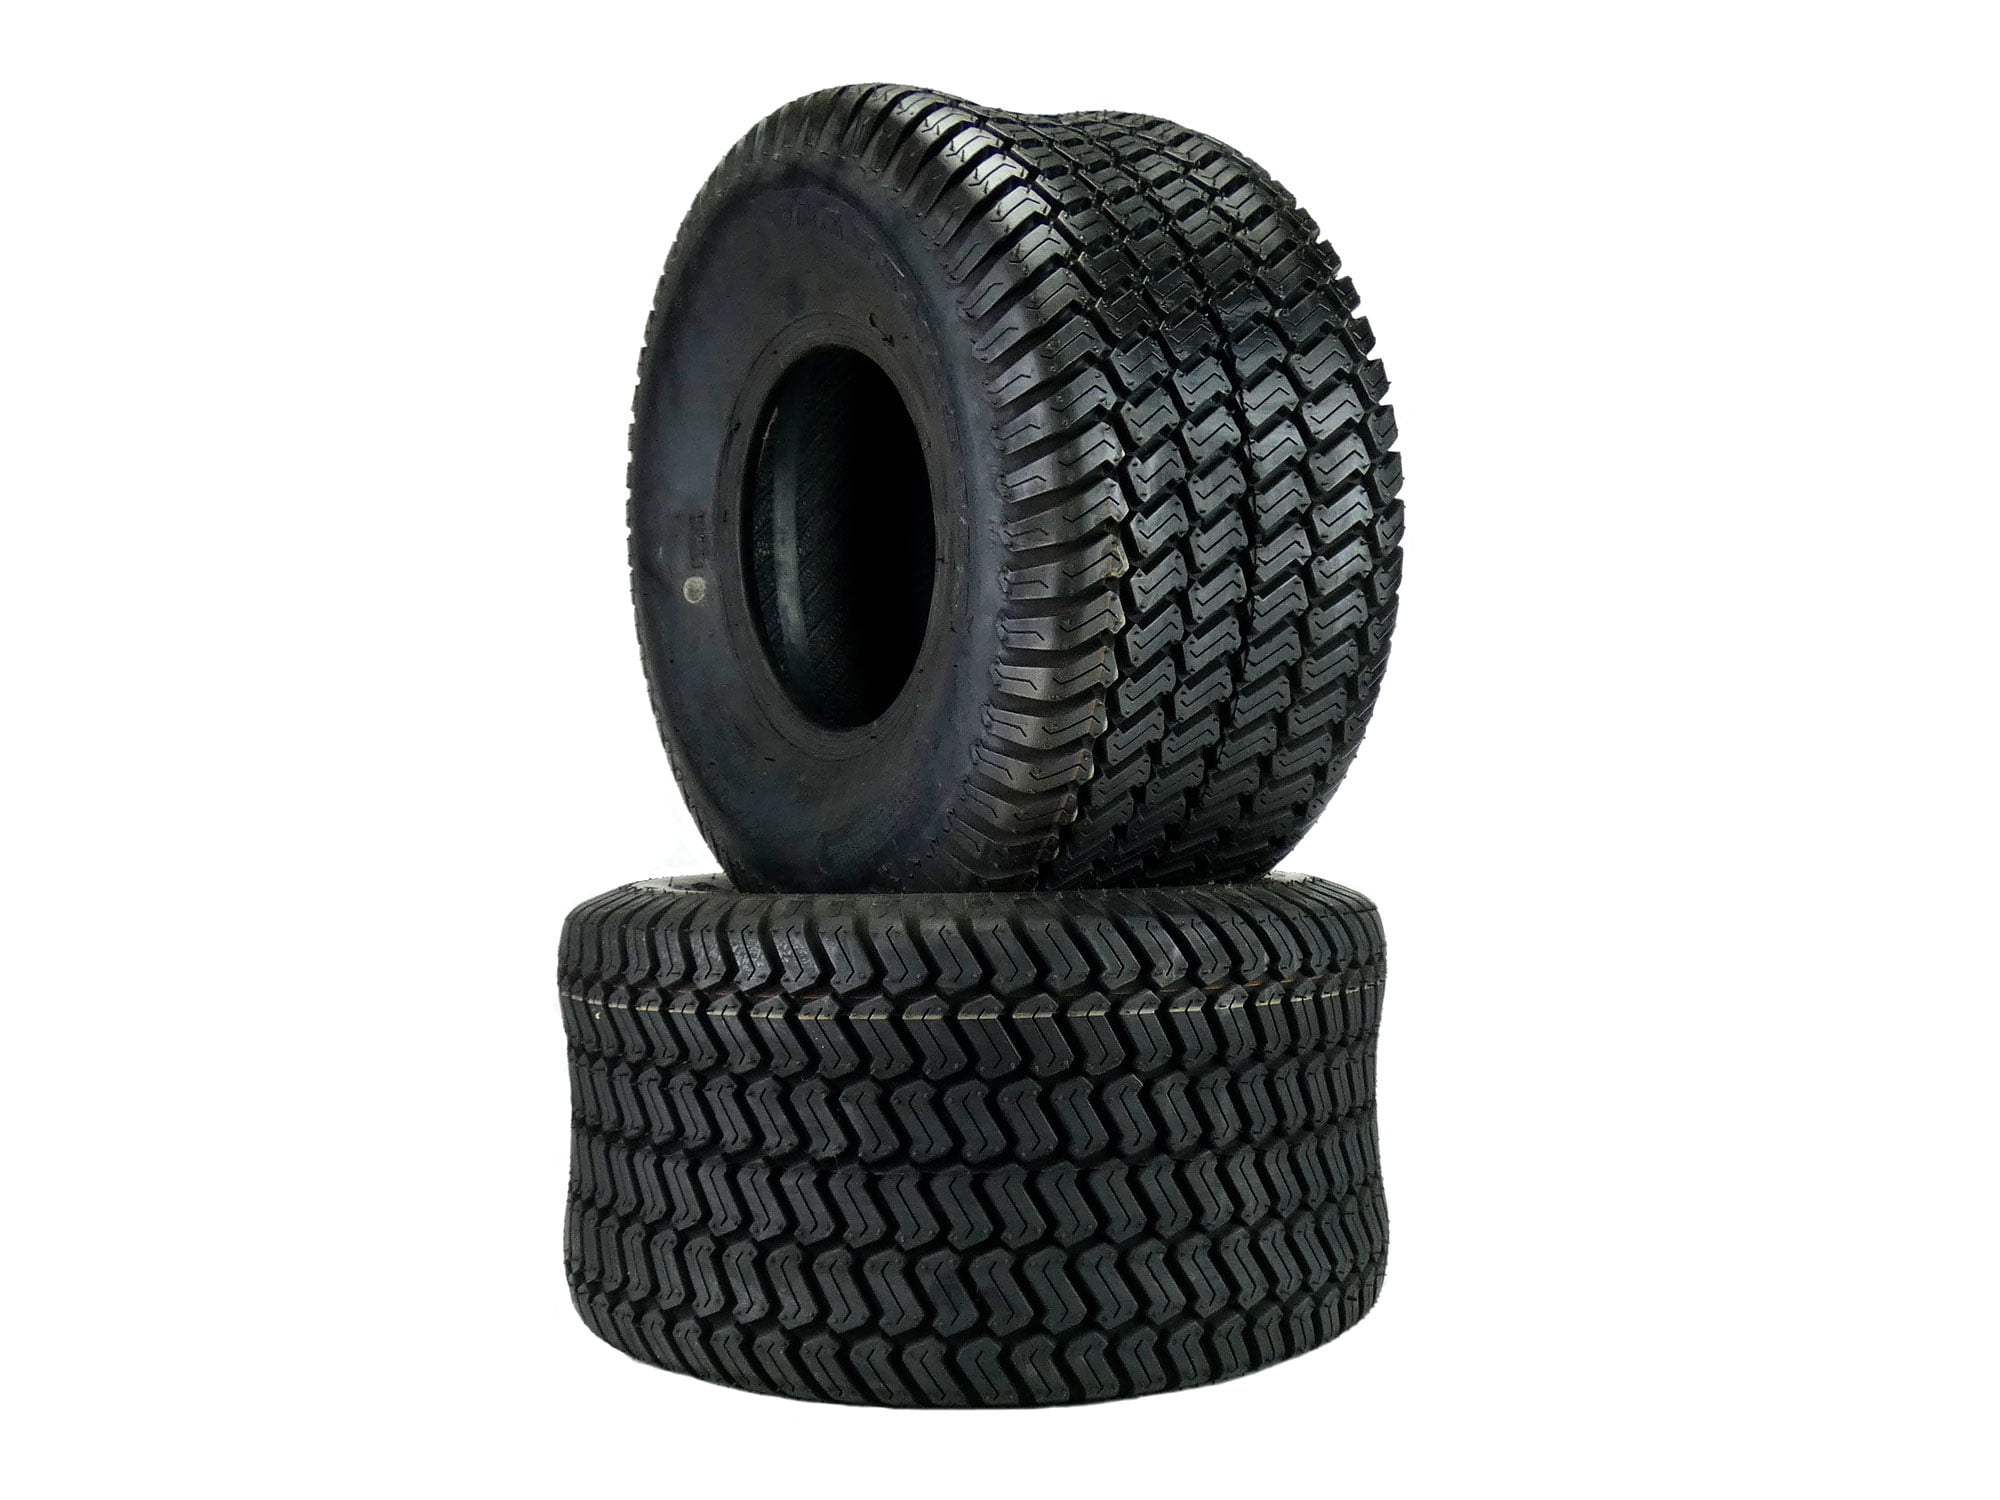 20x10-8 20x10.00-8  Lawn Mower Tractor Turf Tires Heavy Duty 6 Ply Rated TWO